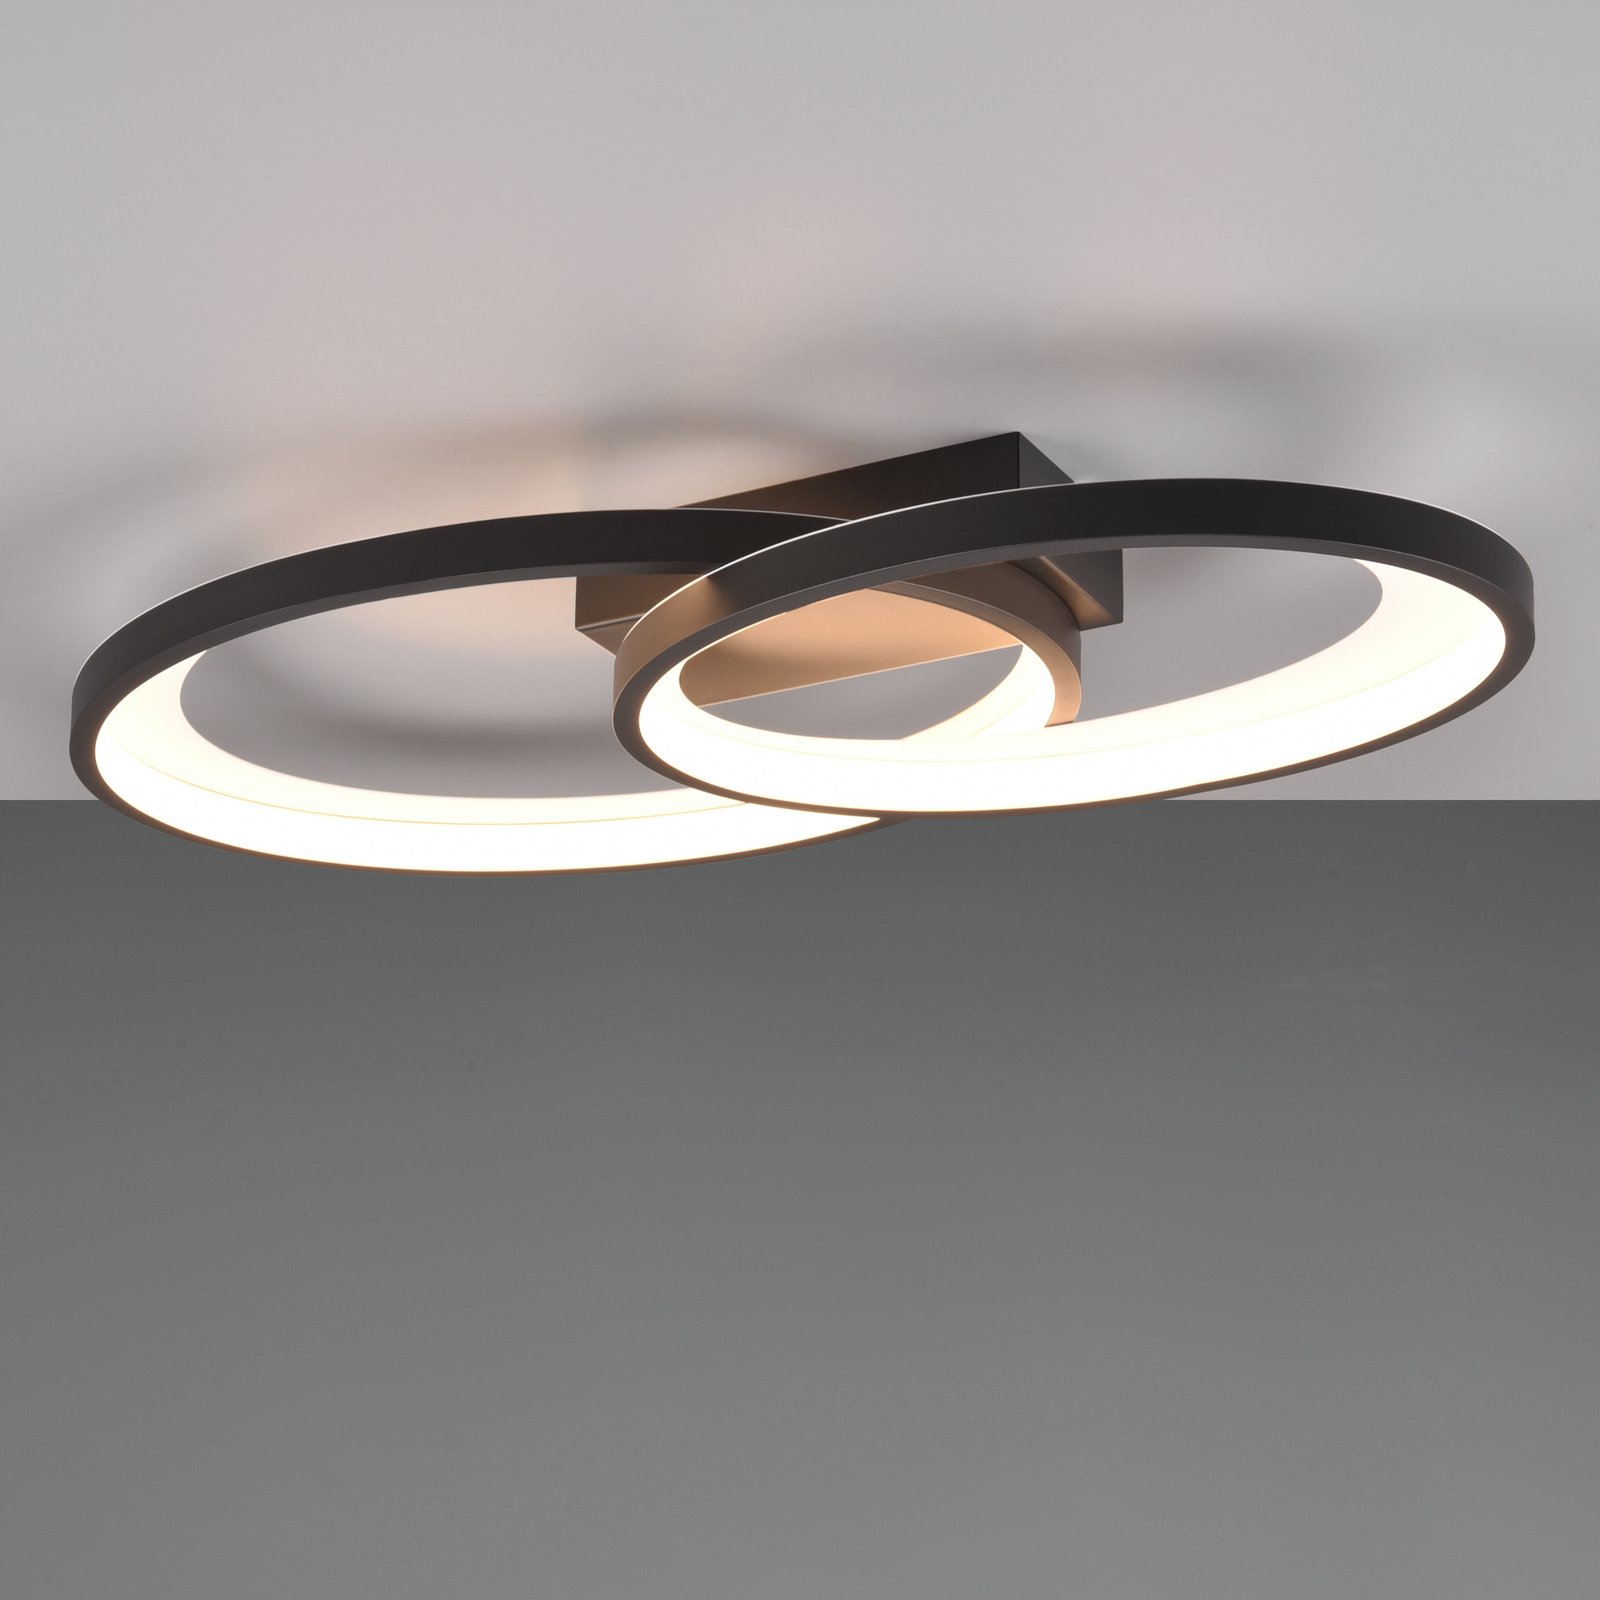 Malaga LED ceiling light with 2 rings, black